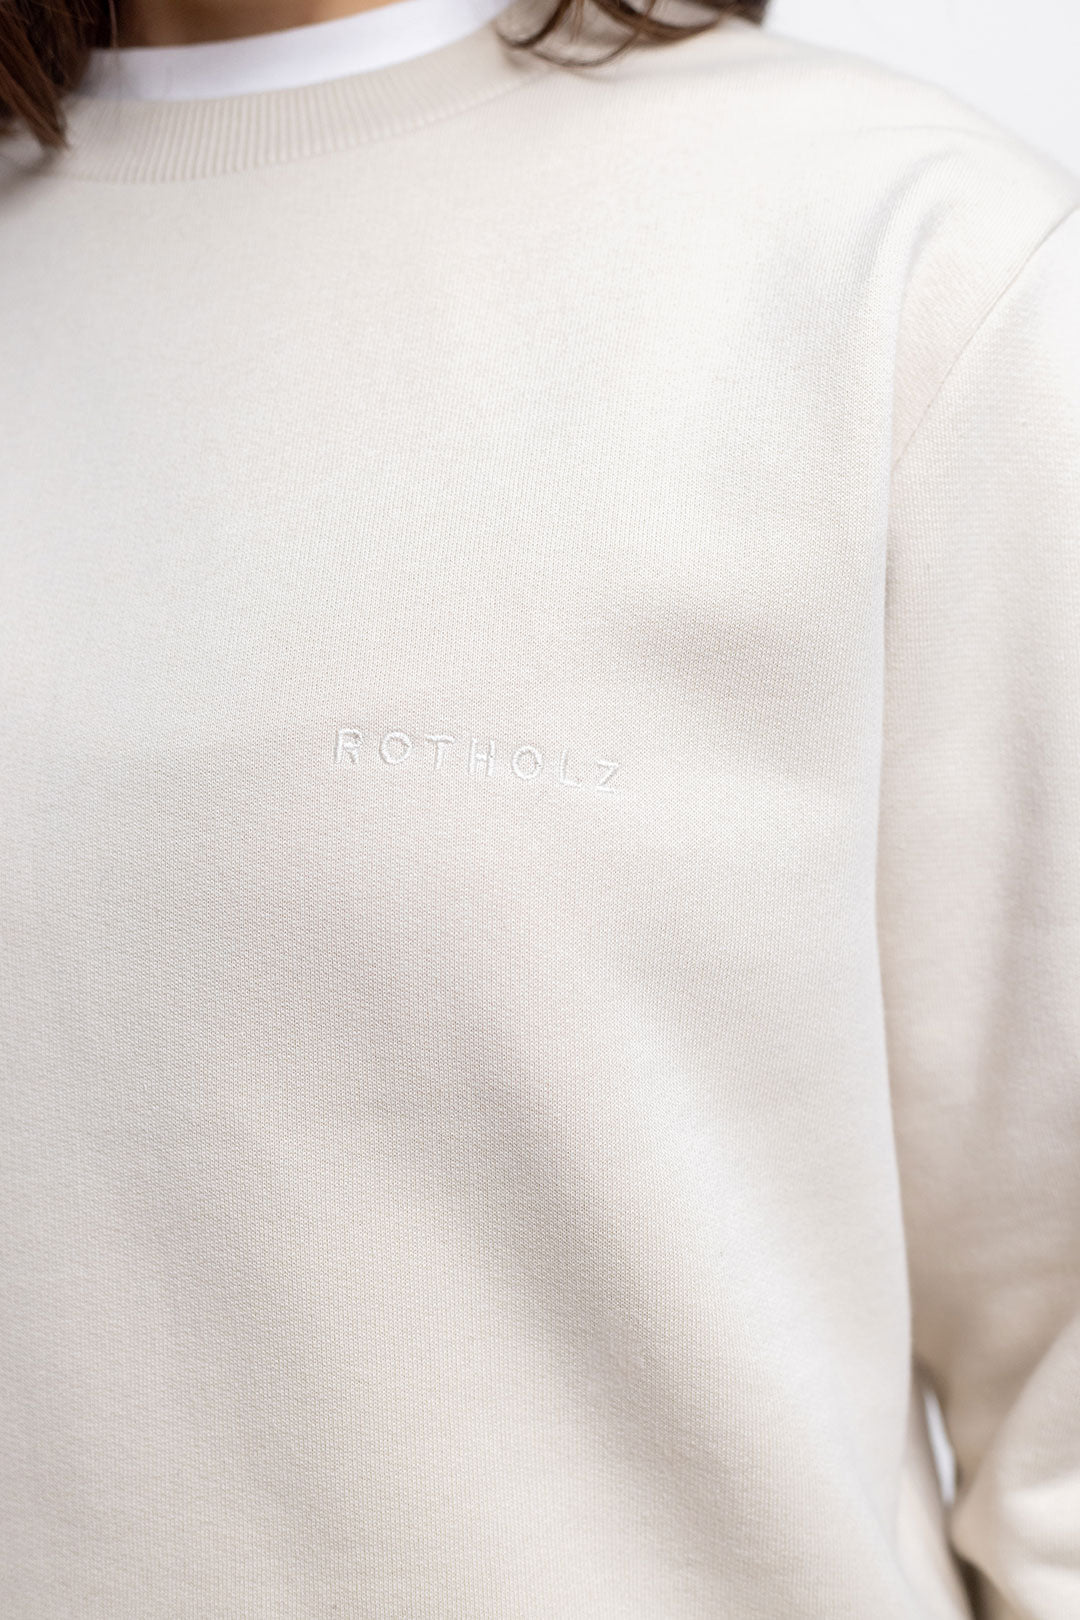 Beige sweatshirt logo made from 100% organic cotton from Rotholz